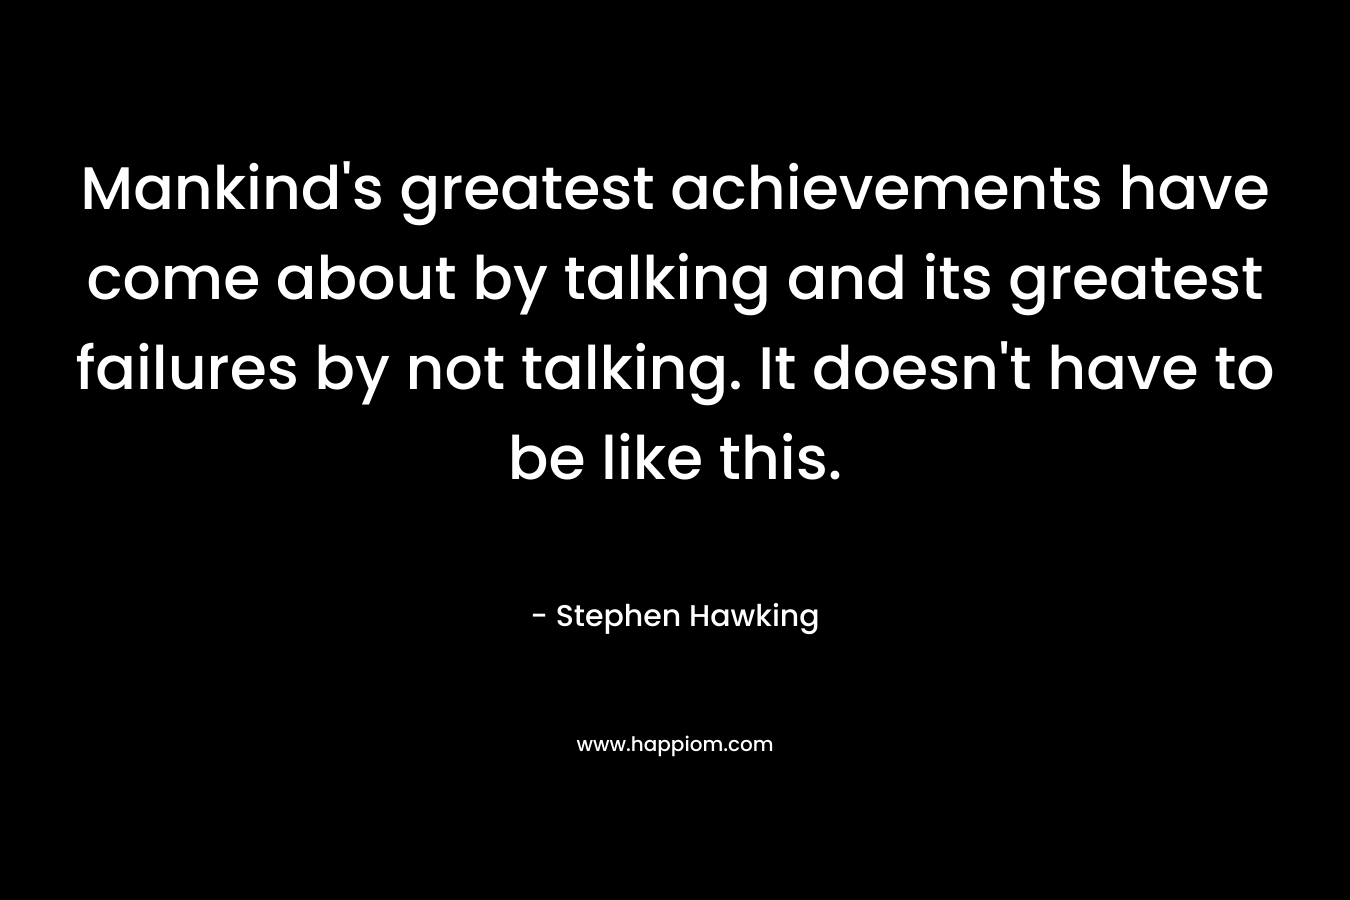 Mankind’s greatest achievements have come about by talking and its greatest failures by not talking. It doesn’t have to be like this. – Stephen Hawking